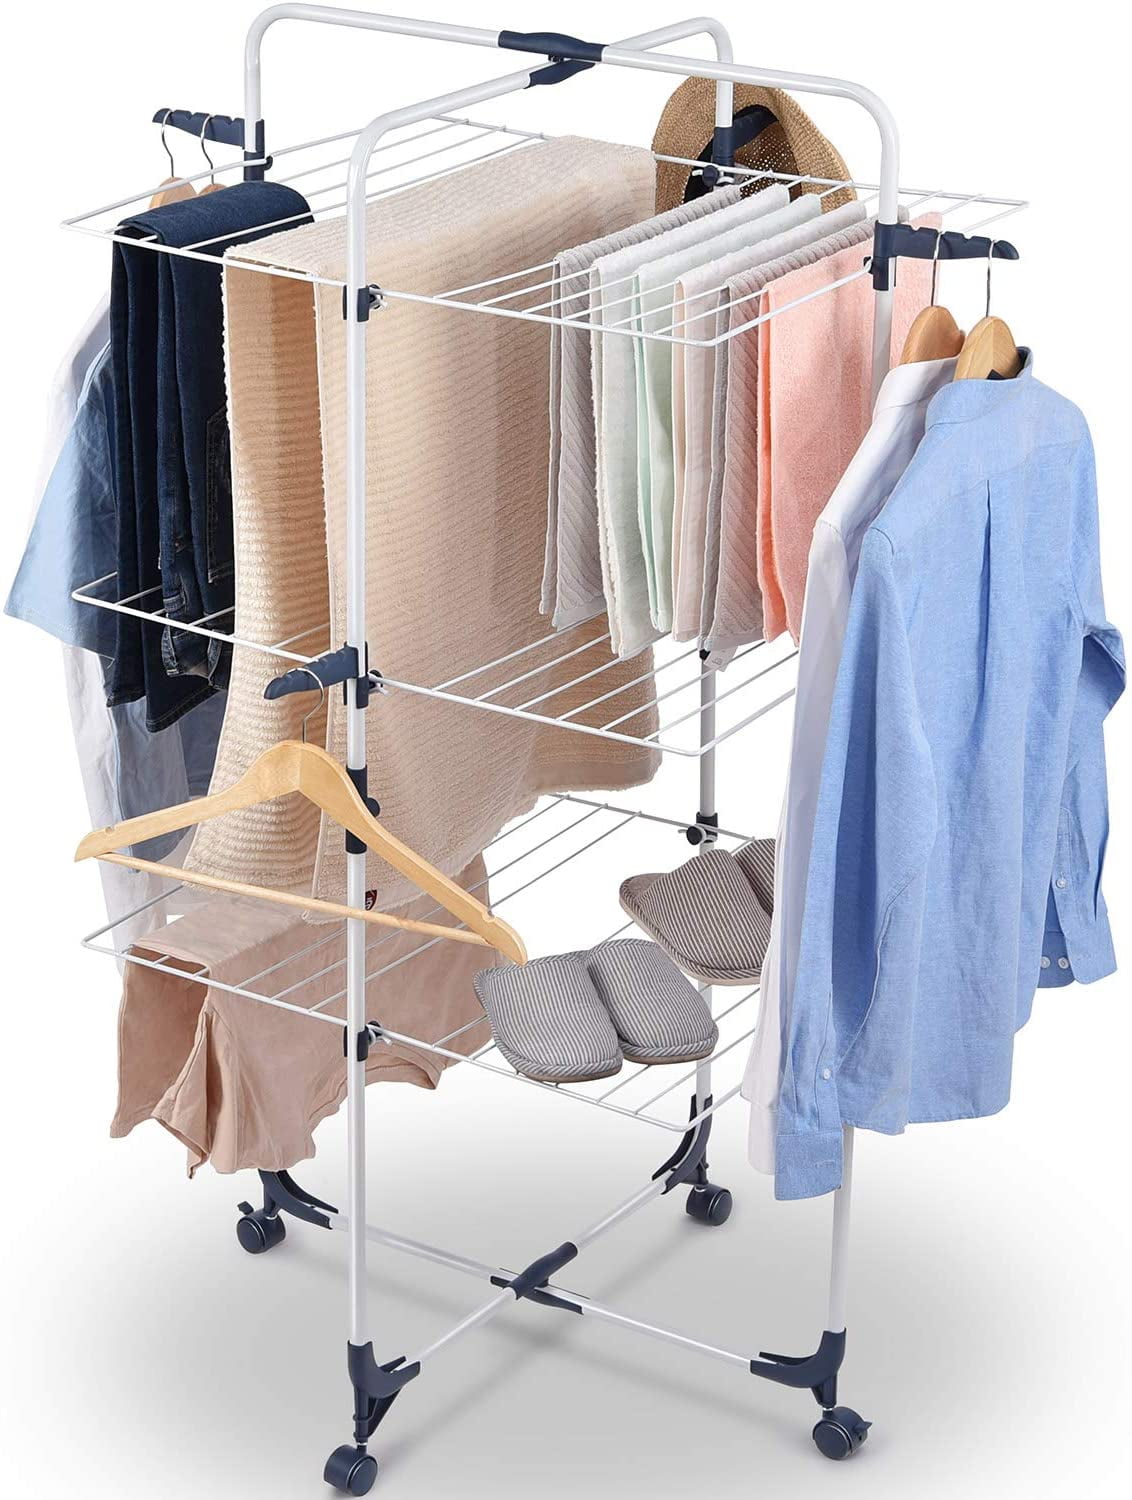 CLOTHES AIRER 3 TIER LAUNDRY DRYER FOLDING RACK CONCERTINA INDOOR HORSE DRYING 